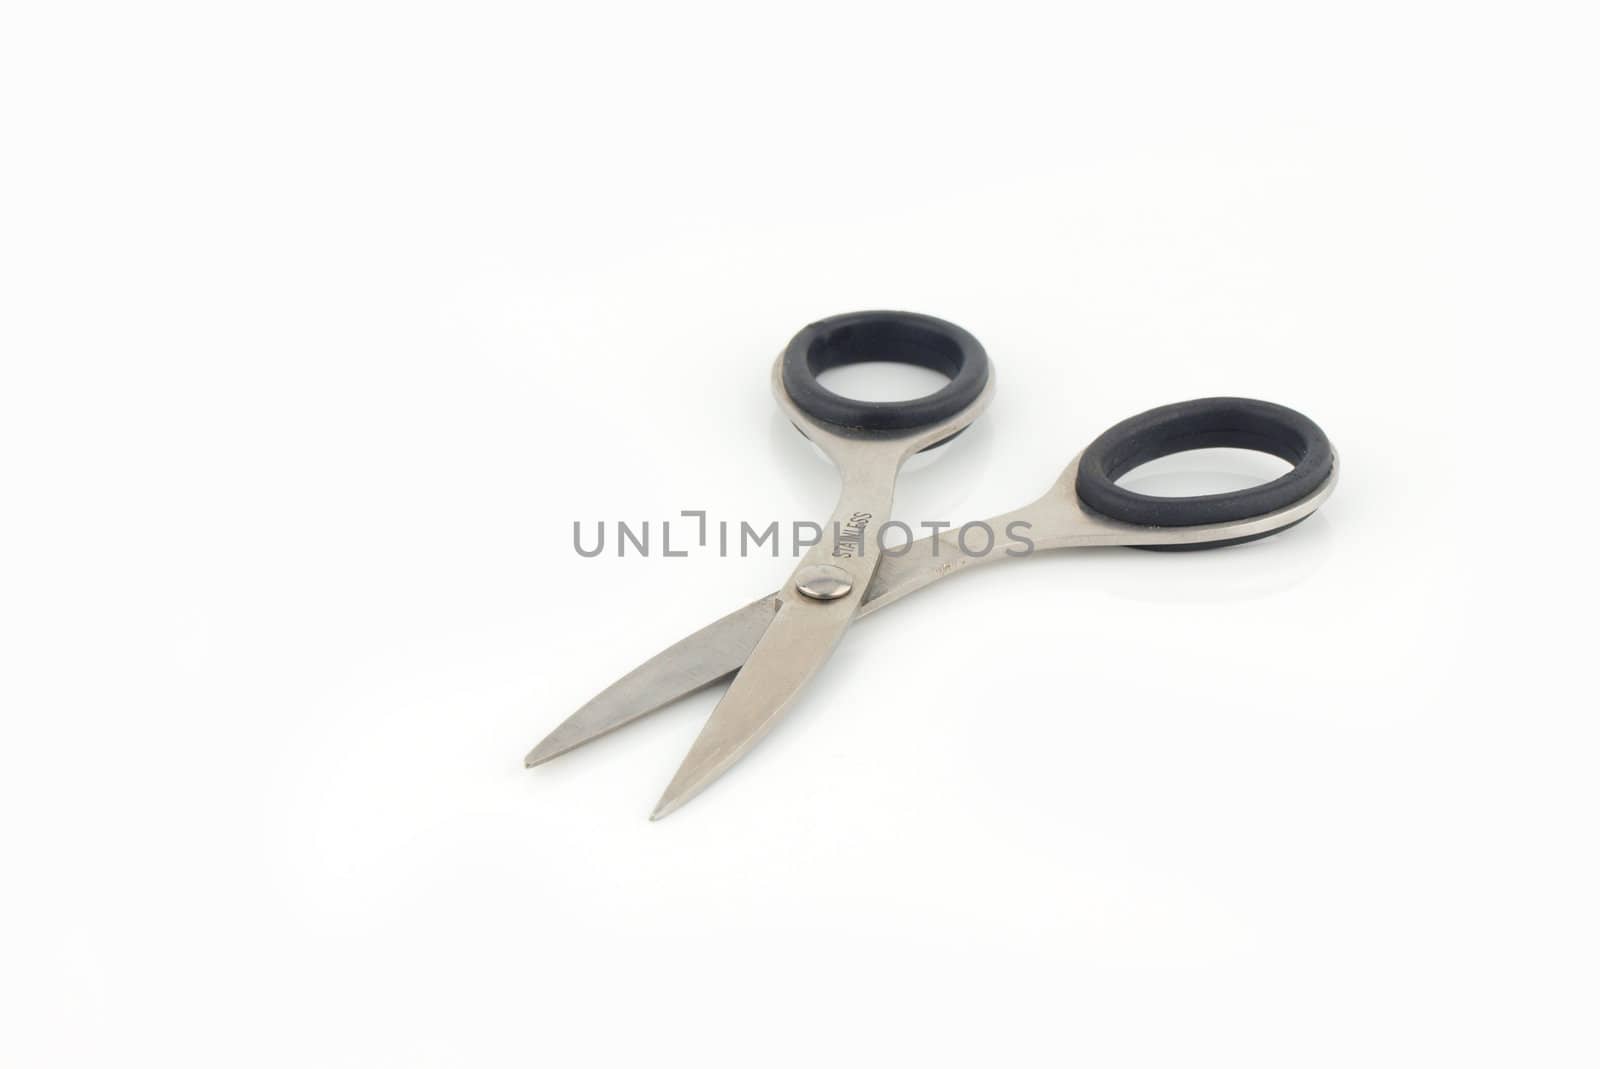 Stainless steel scissors on isolated white background.